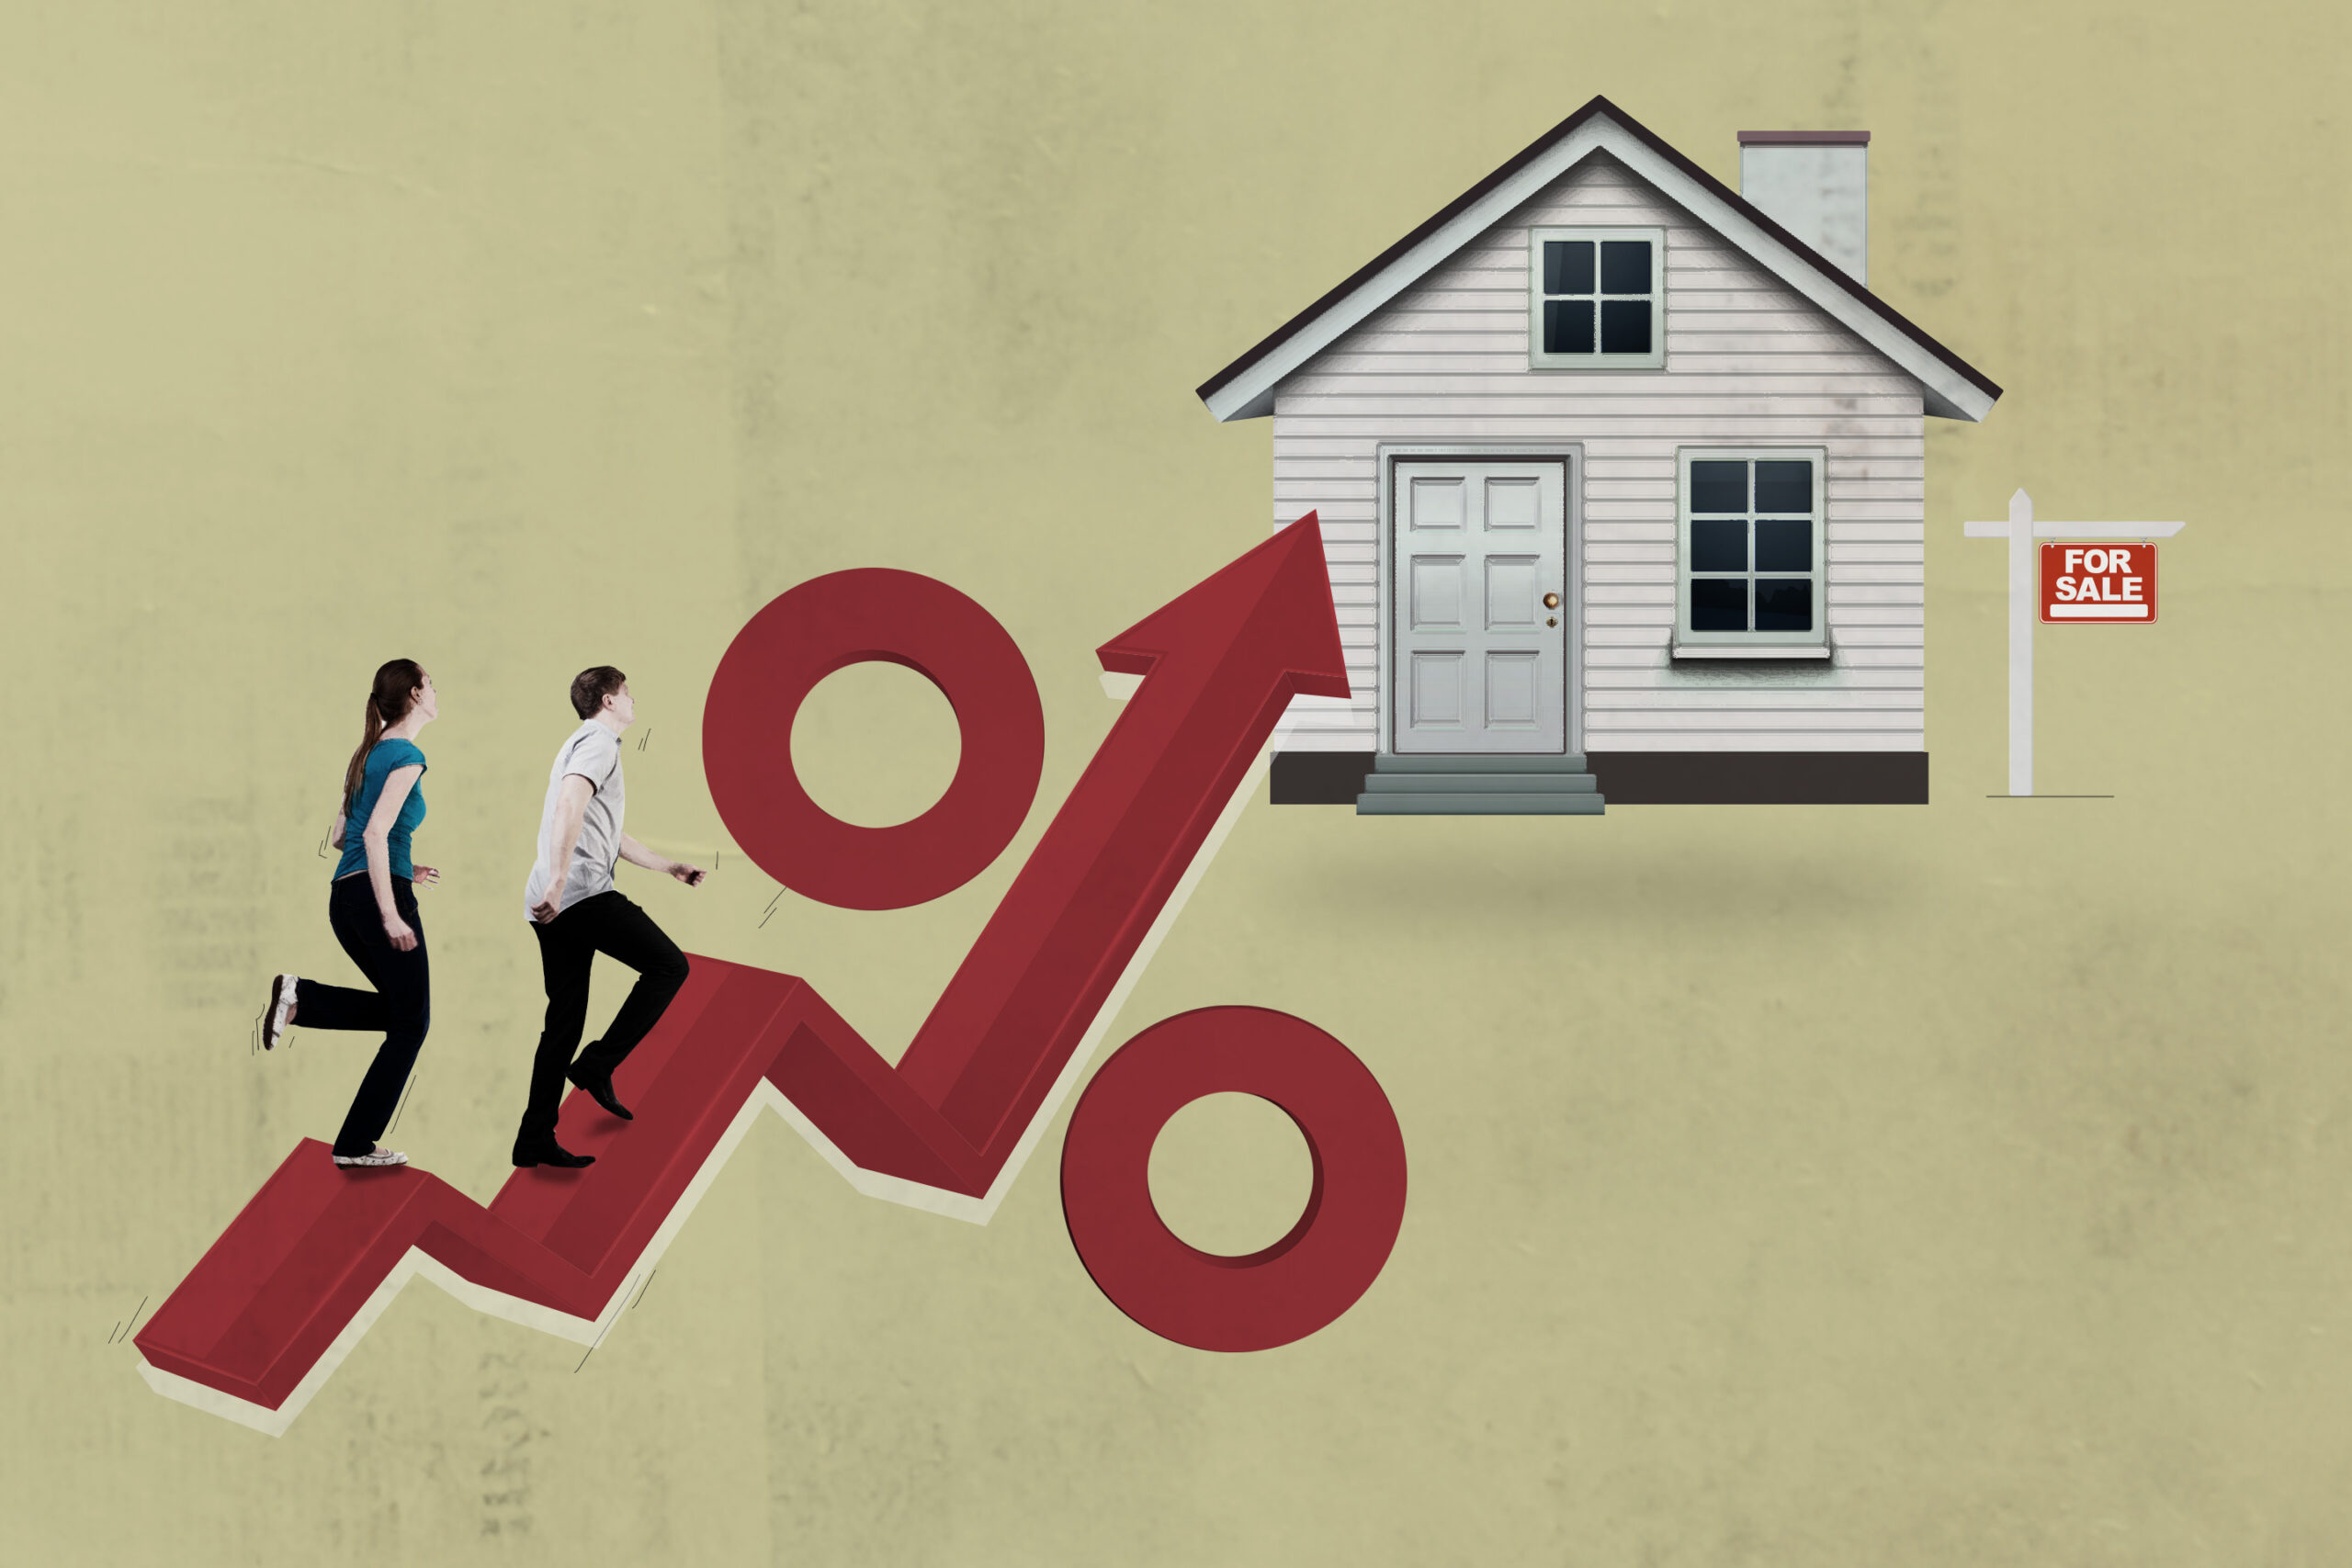 Skyrocketing Mortgage Rates: Why Thousands of U.S. Homeowners Could Face Doubled Payments Soon